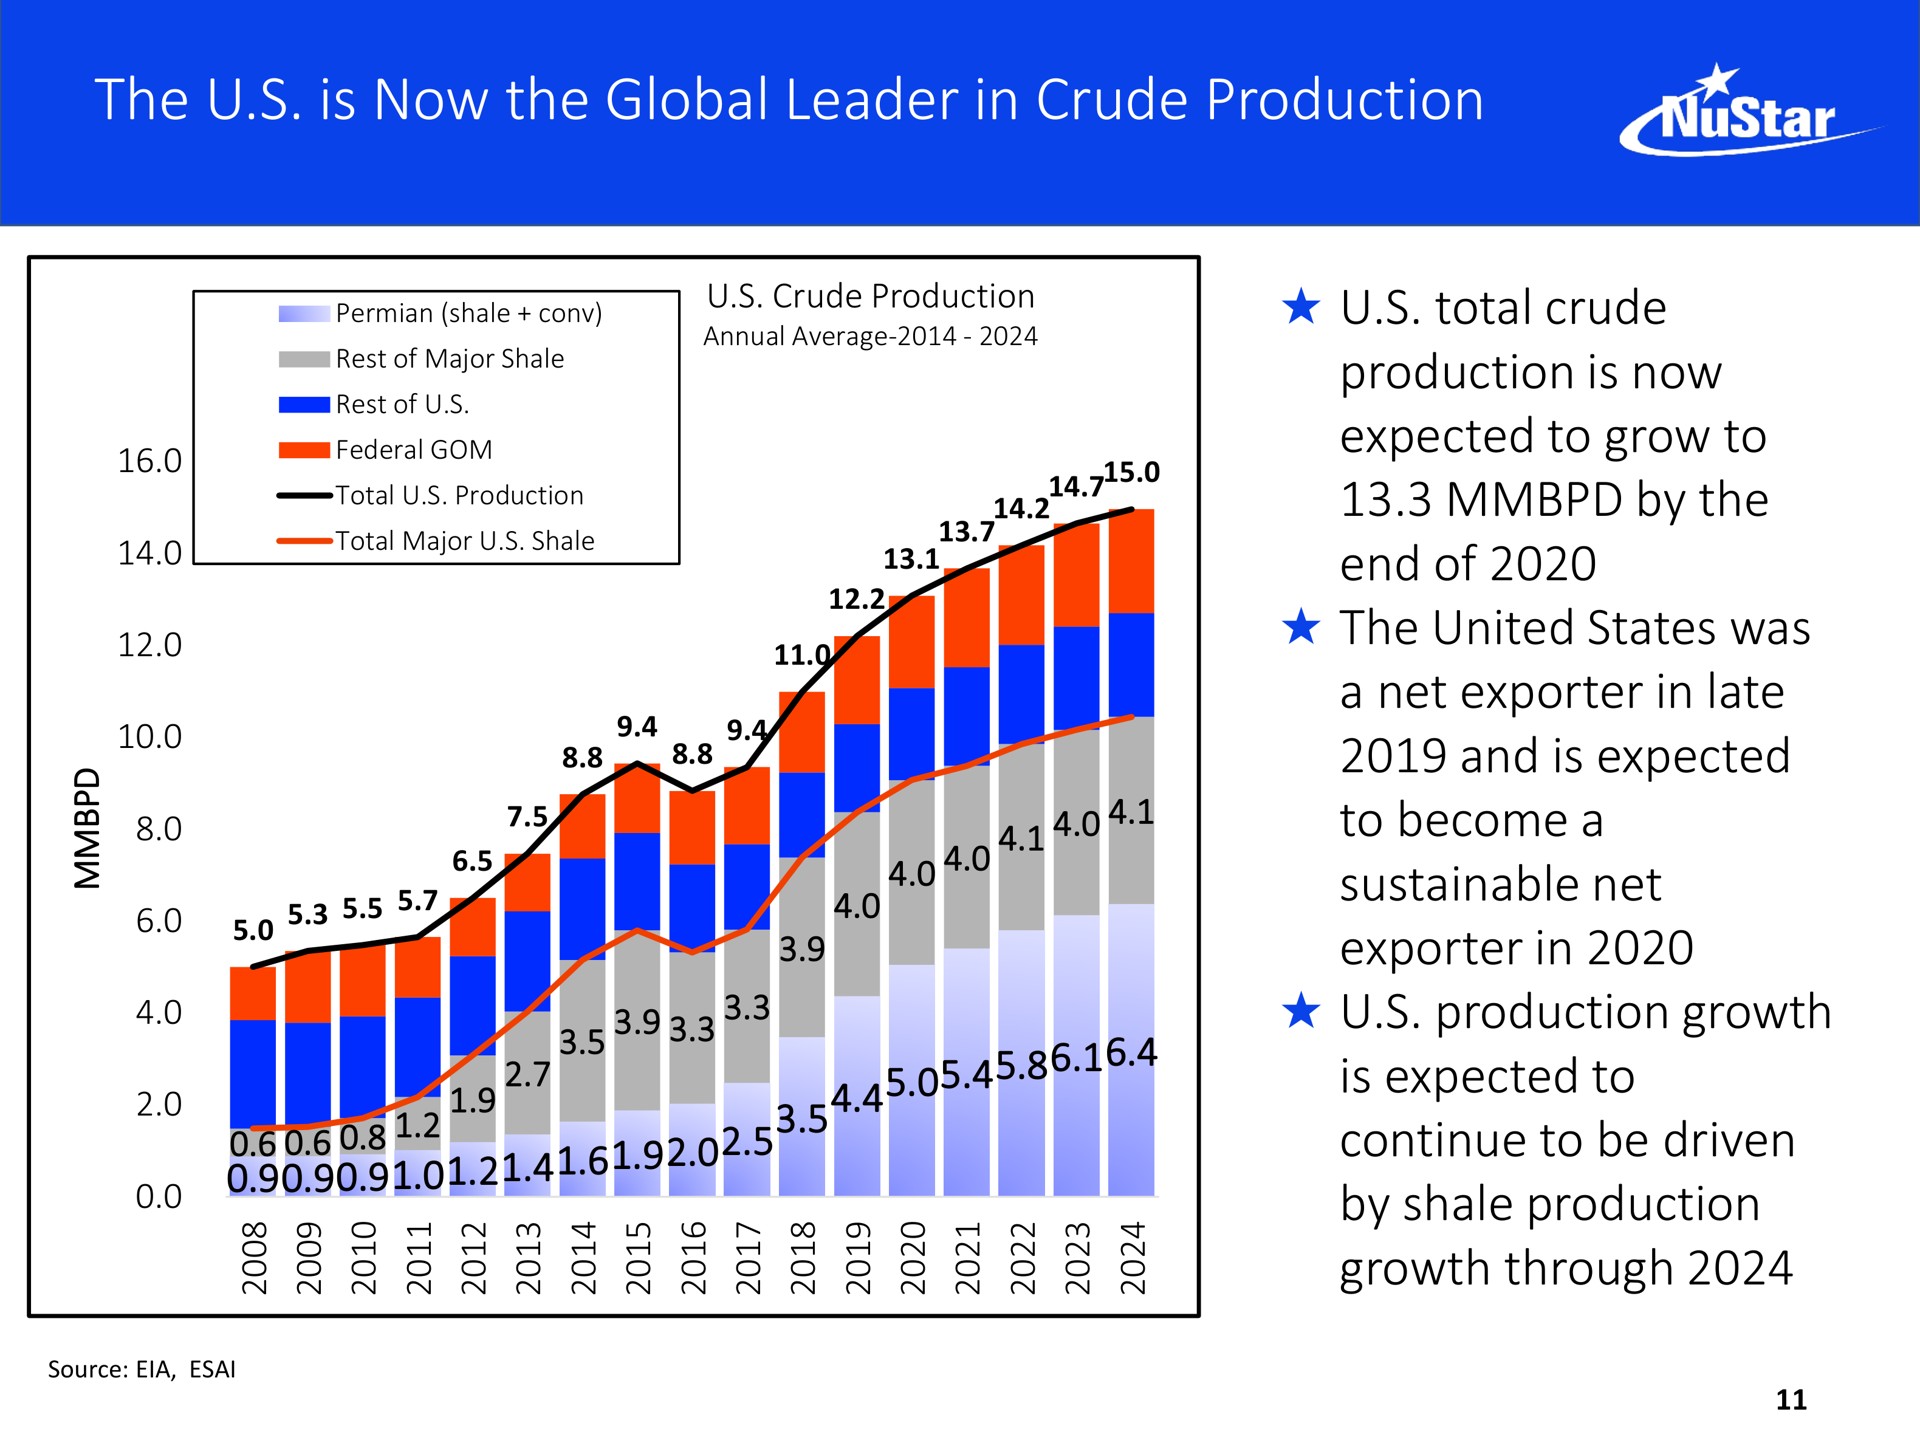 the is now the global leader in crude production total crude production is now expected to grow to by the end of the united states was a net exporter in late and is expected to become a sustainable net exporter in production growth is expected to continue to be driven by shale production growth through | NuStar Energy